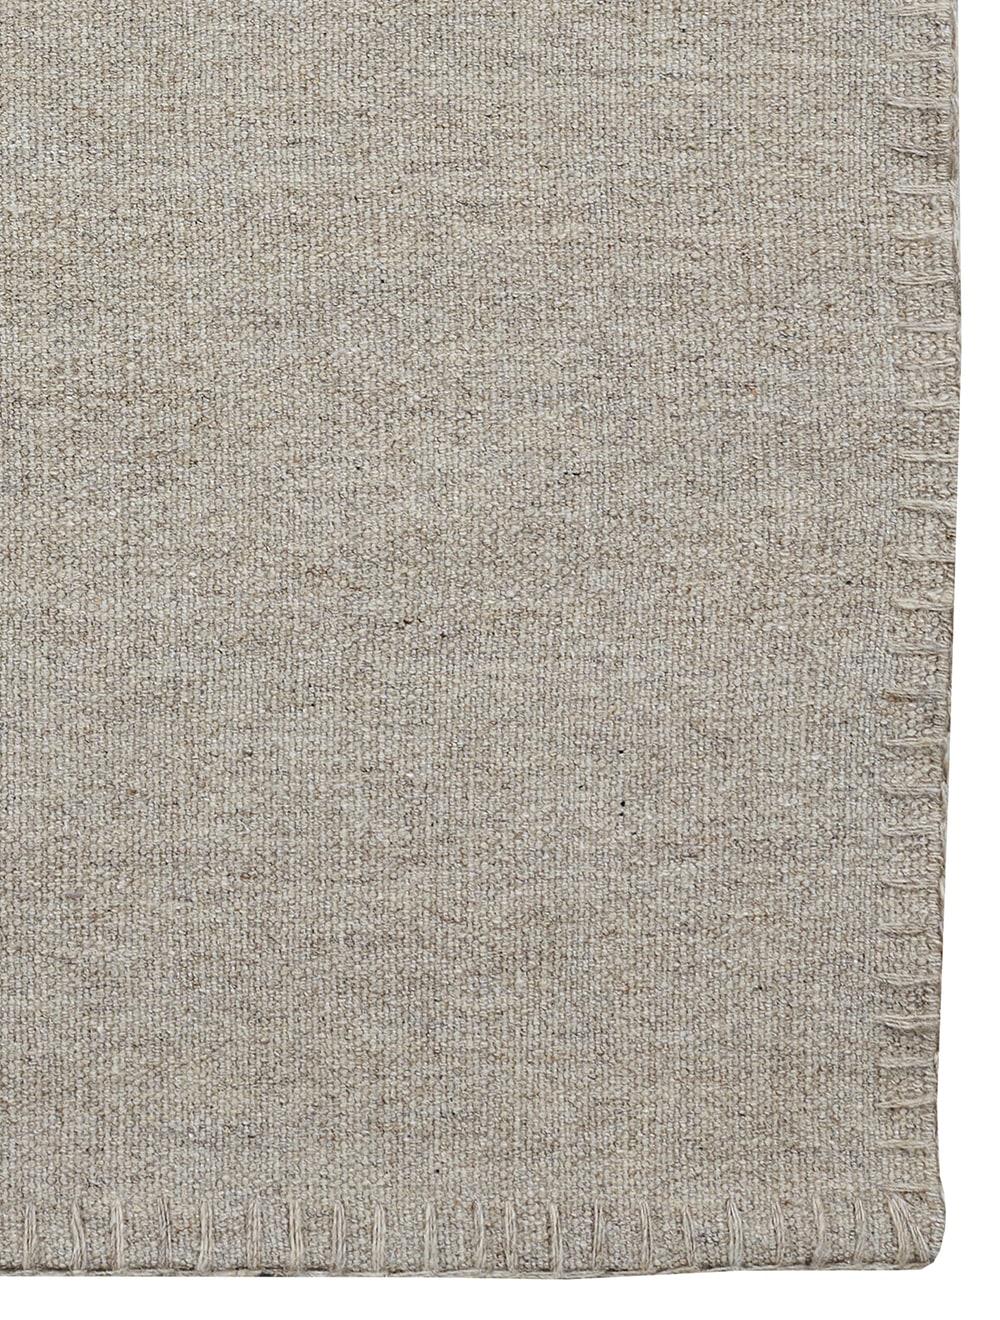 Light Beige with stitches escape Kelim carpet by Massimo Copenhagen
Designed by Space Copenhagen
Handwoven
Materials: 100% undyed natural wool.
Dimensions: W 300 x H 400 cm
Available colors: Chalk, chalk with fringes, light beige, light beige